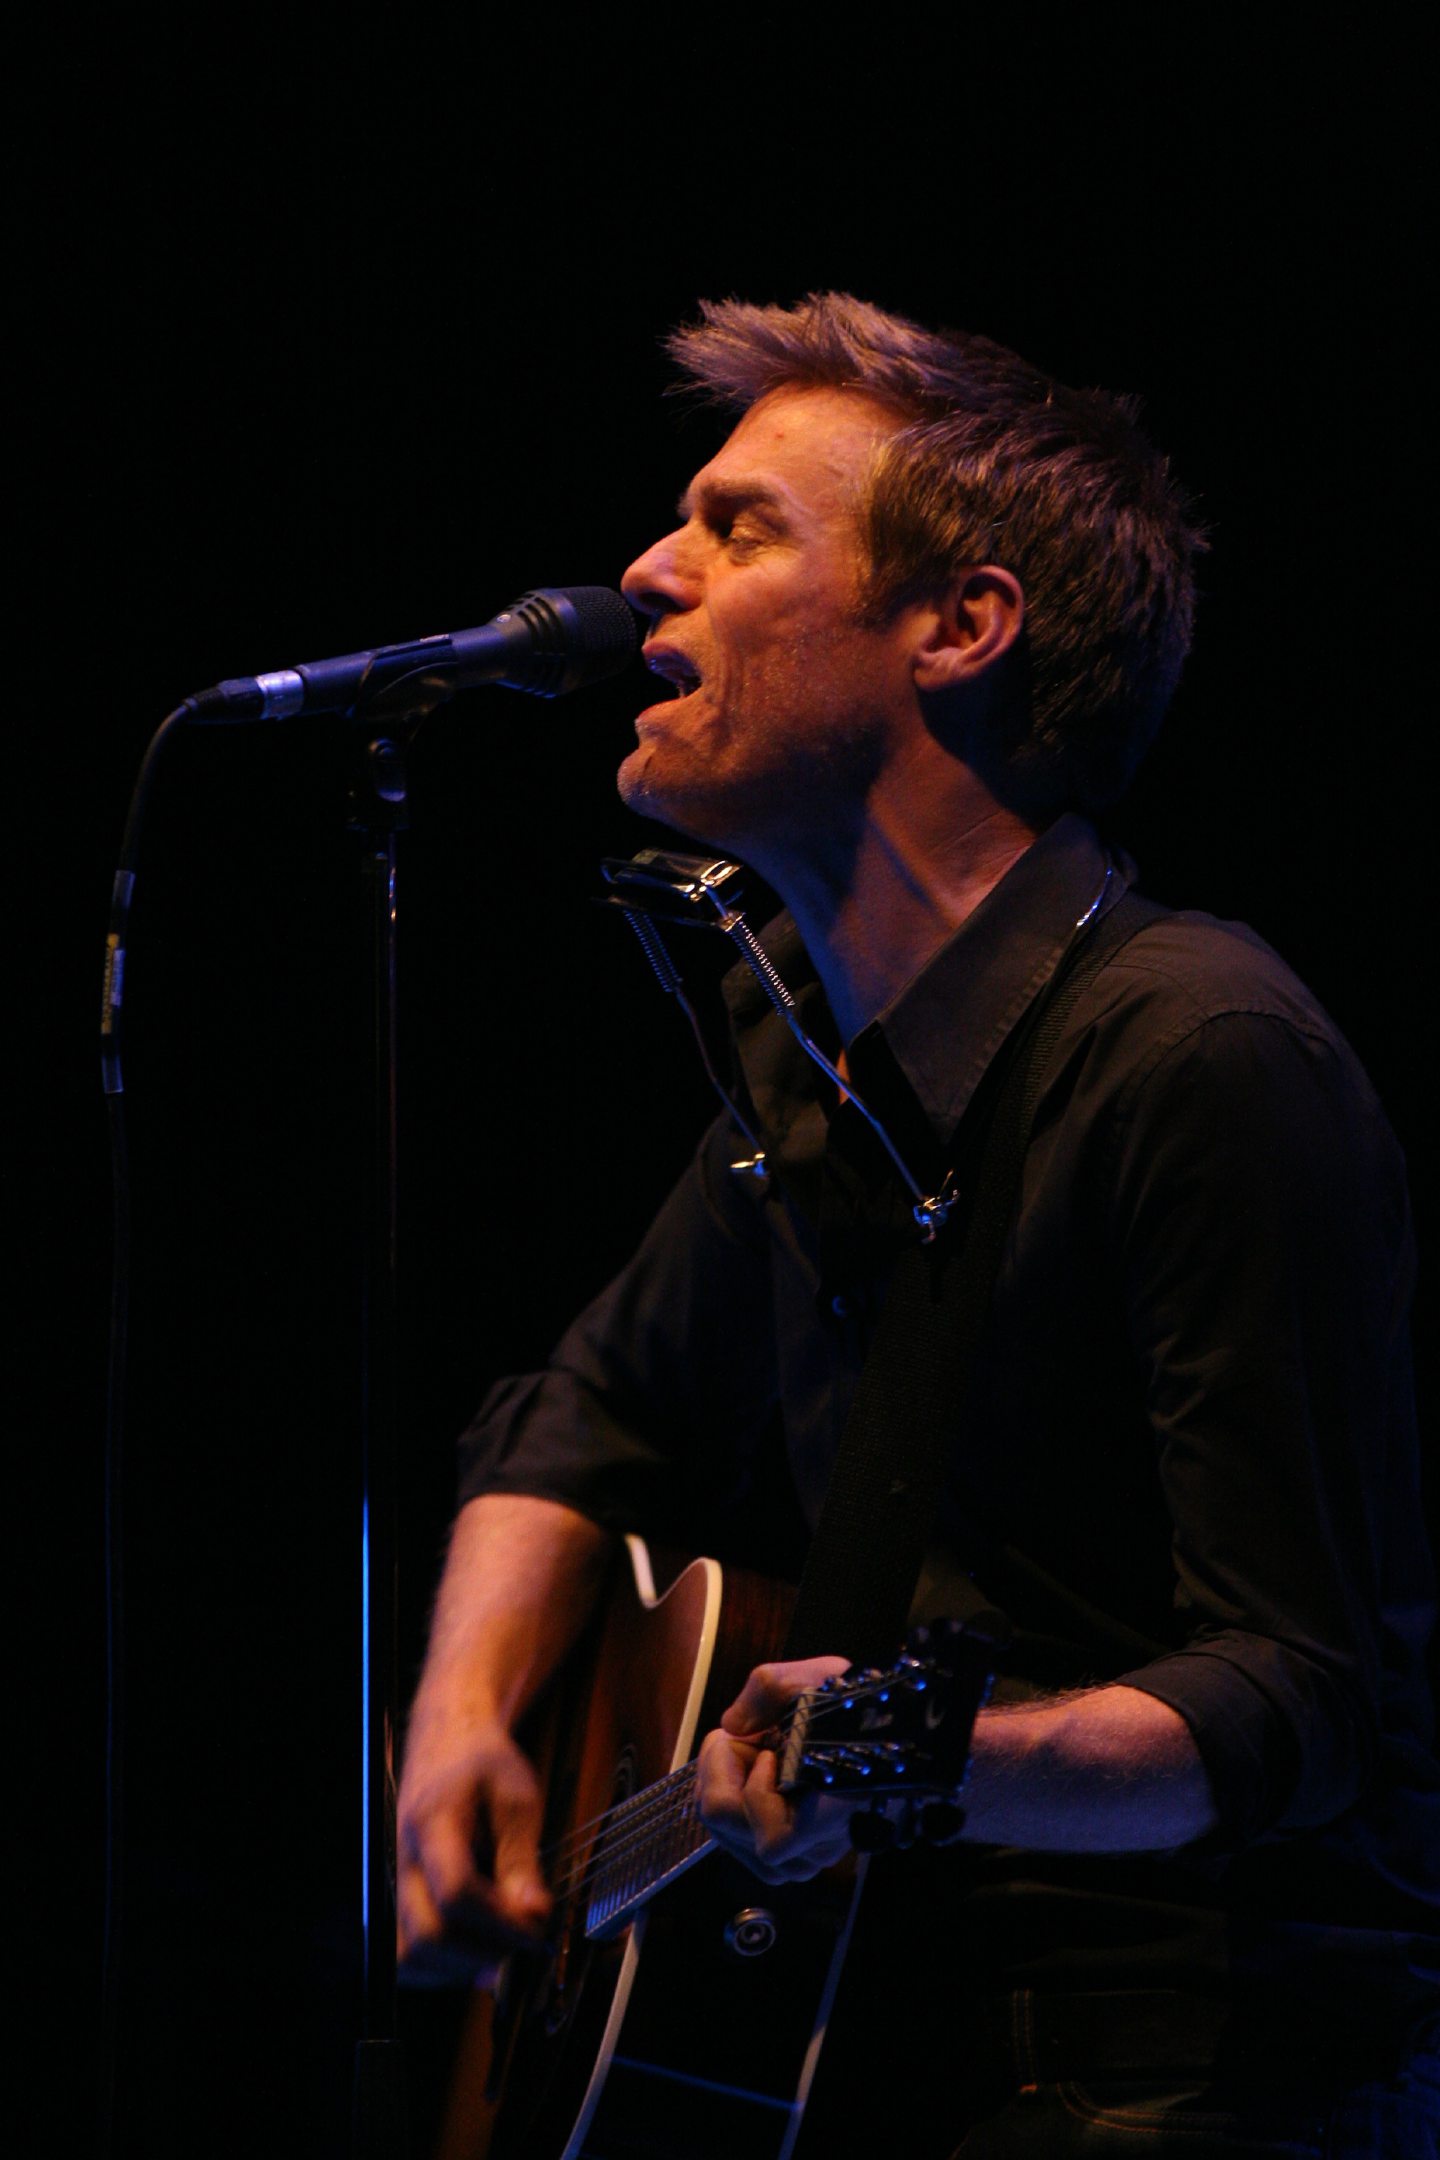 Bryan Sings into the microphone during his solo show at The Caird Hall in Dundee.